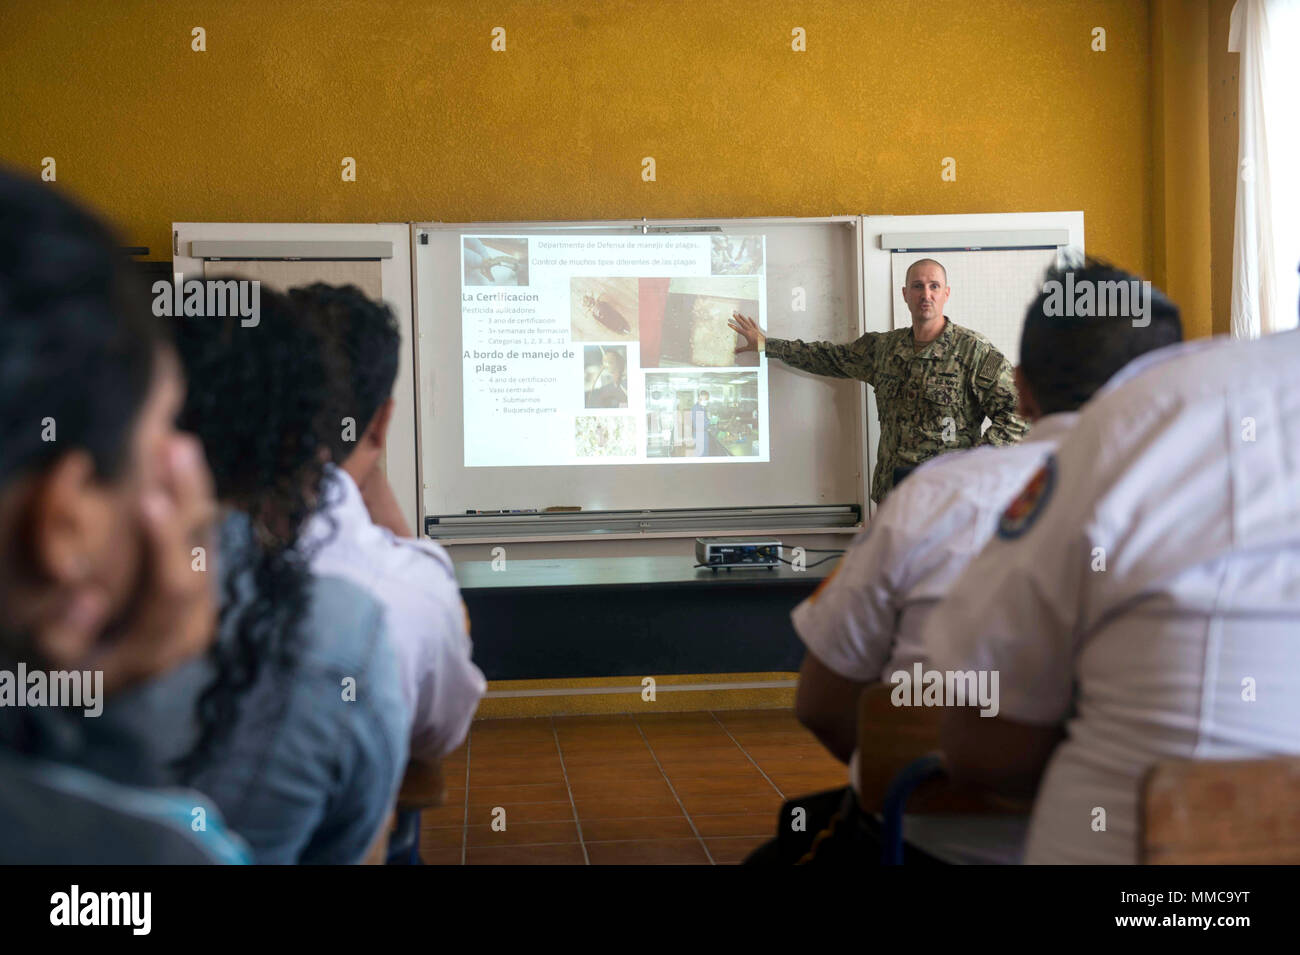 171011-N-YM856-0009 PUERTO BARRIOS, Guatemala (Oct. 11, 2017) Lt. Cmdr. Ian Sutherland, technical director for the Navy Entomology Center of Excellence, gives a lecture on pest control to Guatemalan first responders during Southern Partnership Station 17 (SPS 17). SPS 17 is a U.S. Navy deployment executed by U.S. Naval Forces Southern Command/U.S. 4th Fleet, focused on subject matter expert exchanges with partner nation militaries and security forces in Central and South America. (U.S. Navy Combat Camera photo by Mass Communication Specialist 2nd Class Brittney Cannady/Released) Stock Photo